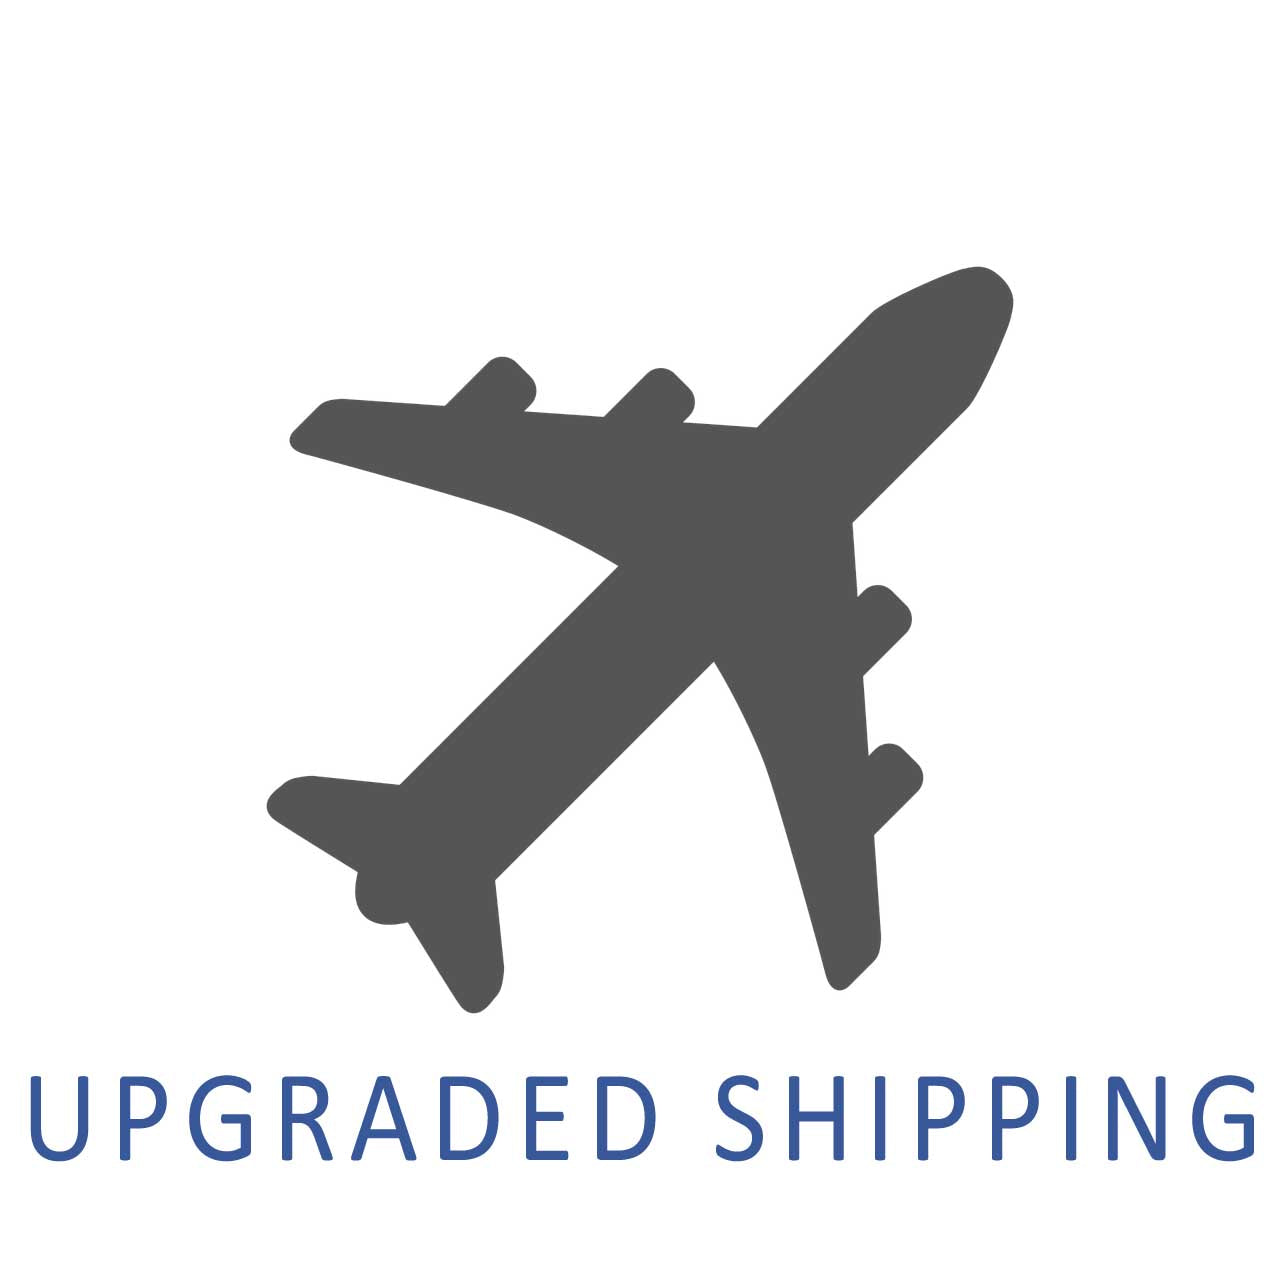 Upgraded Shipping